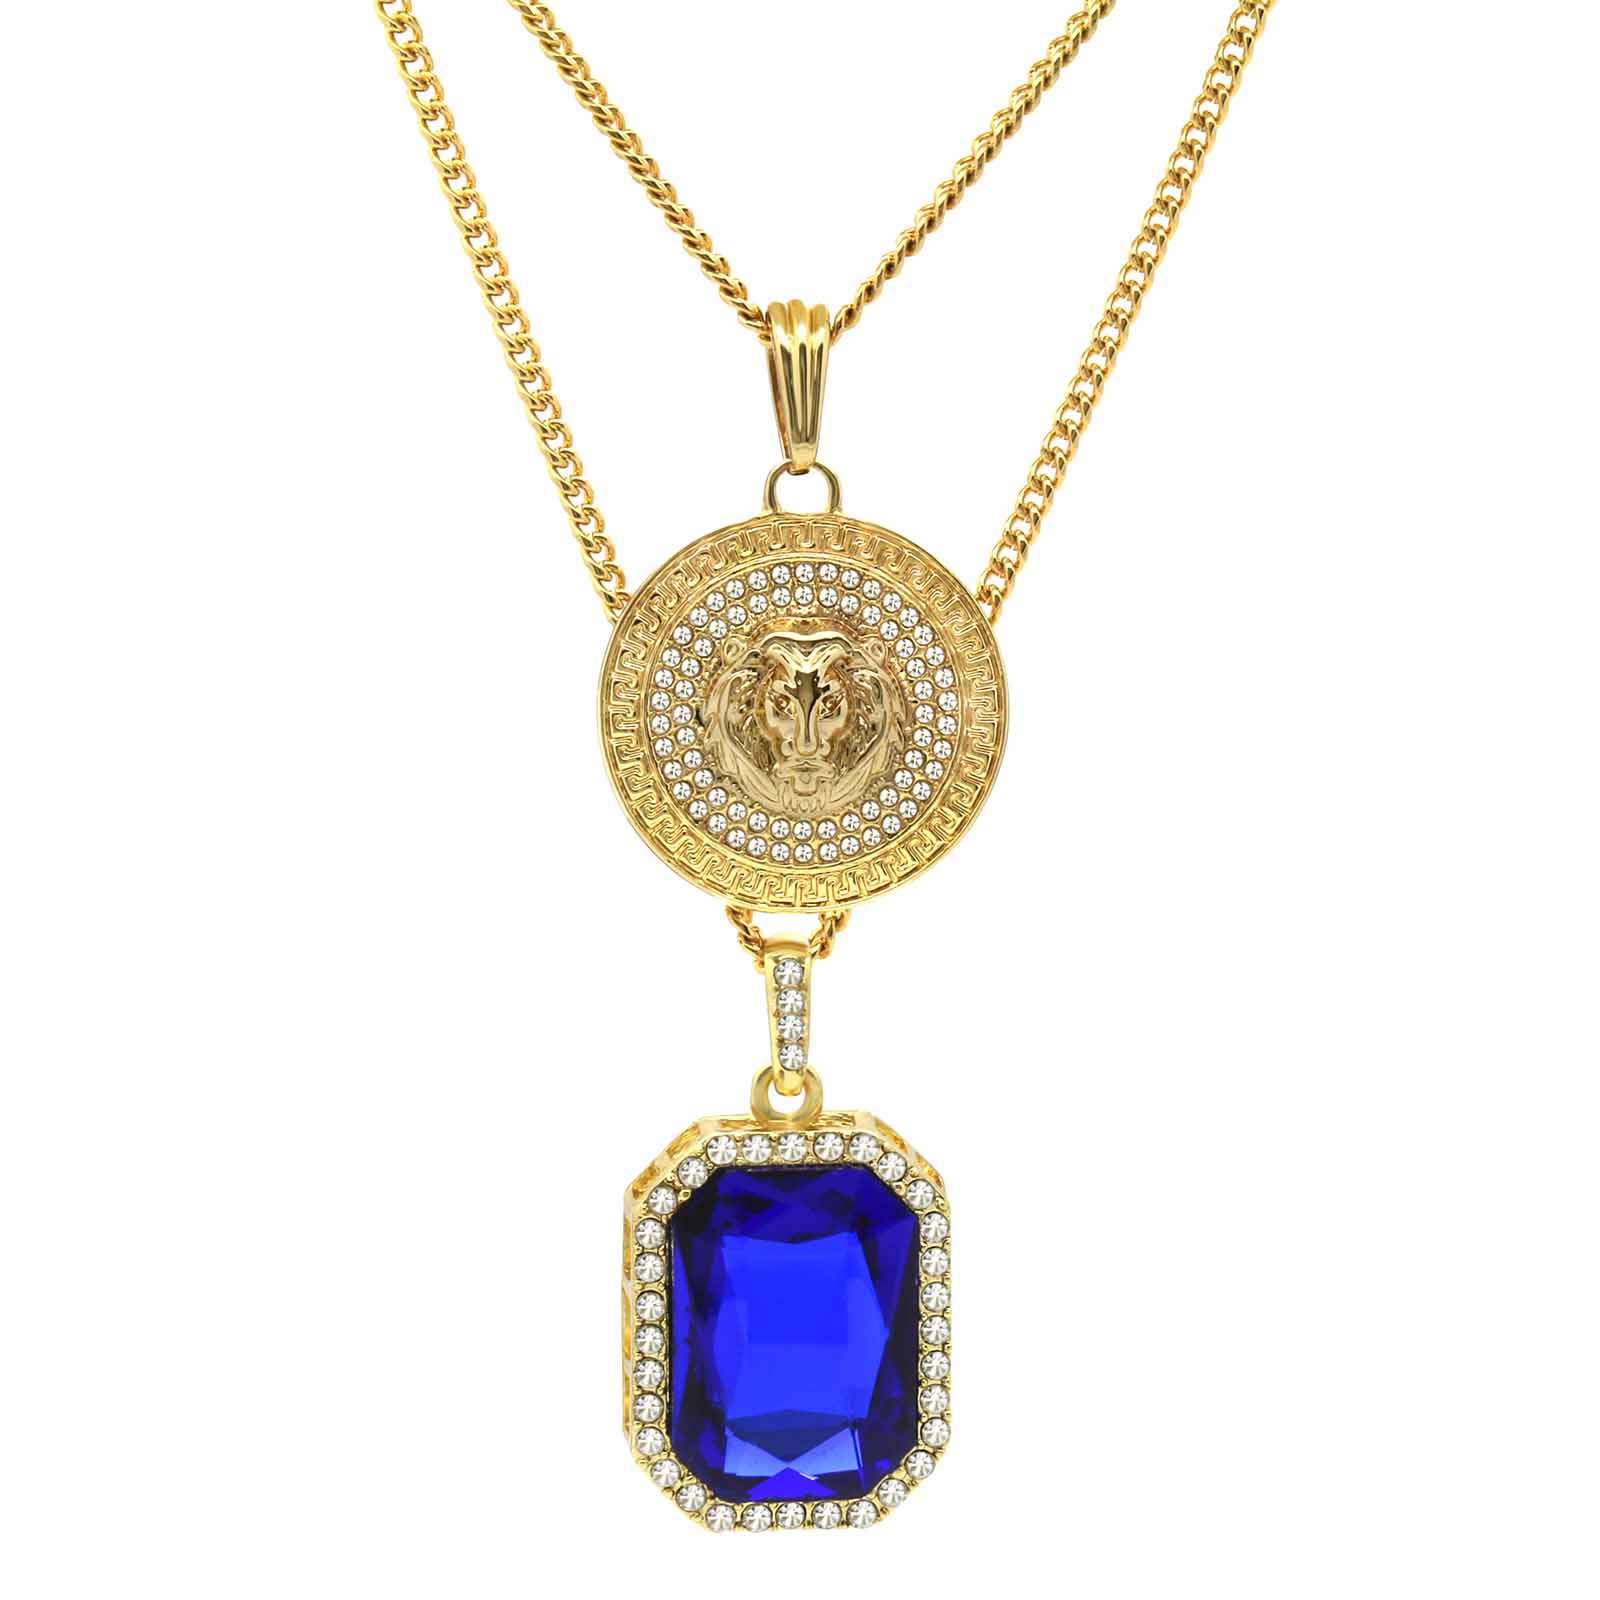 BLUE SAPPHIRE AND LION DOUBLE  PENDANT WITH CUBAN CHAIN